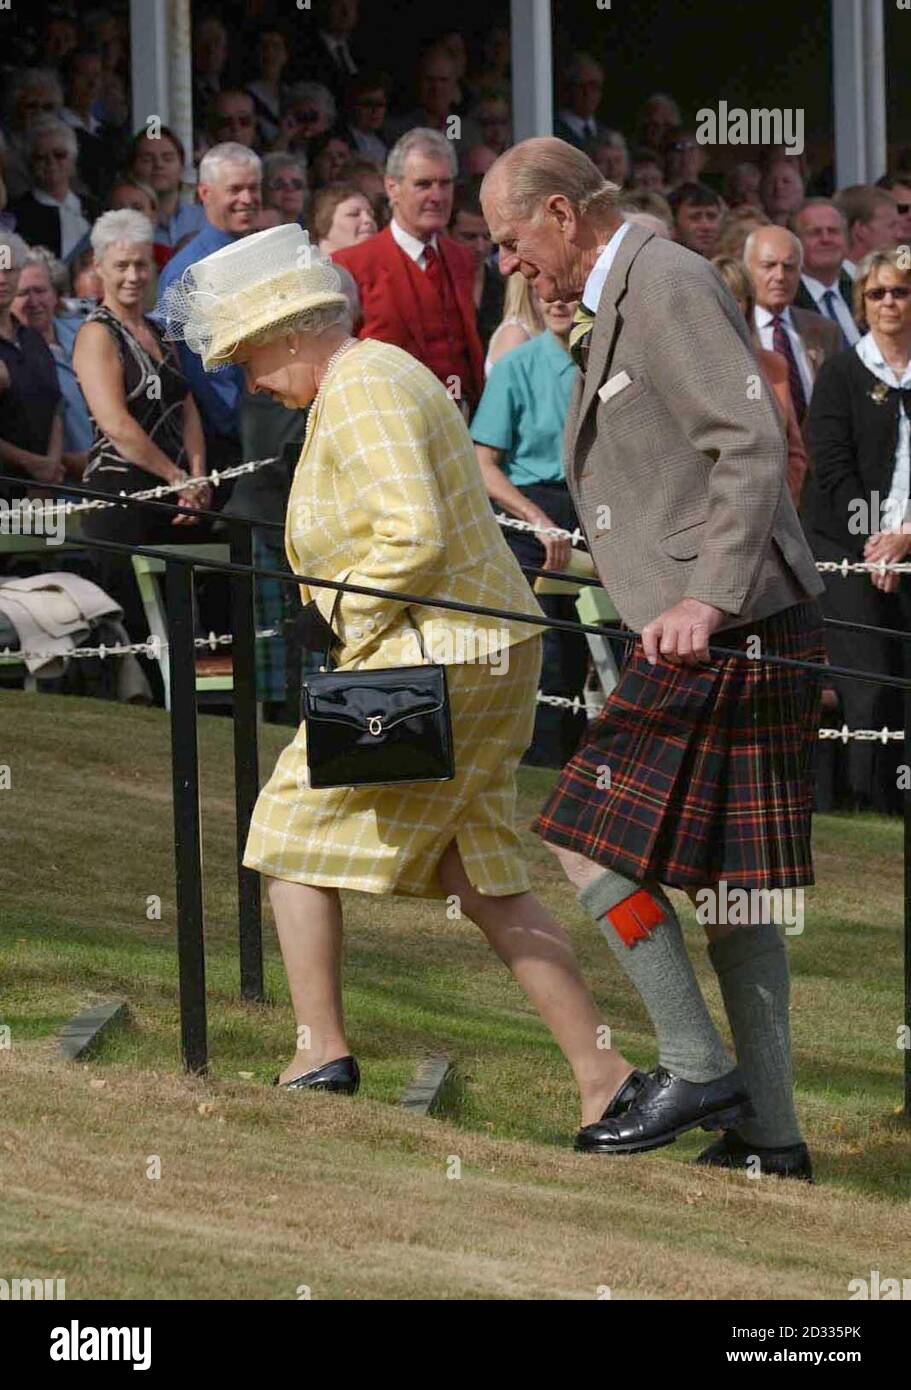 Britain's Queen Elizabeth II and the Duke of Edinburgh arrive at the Braemar Royal Highland Games, in Aberdeenshire, where they were joined by Prime Minister Tony Blair and wife  Cherie..  .. to watch the annual event which has a history stretching back to the days of King Malcolm Canmore, 900 years ago. Stock Photo